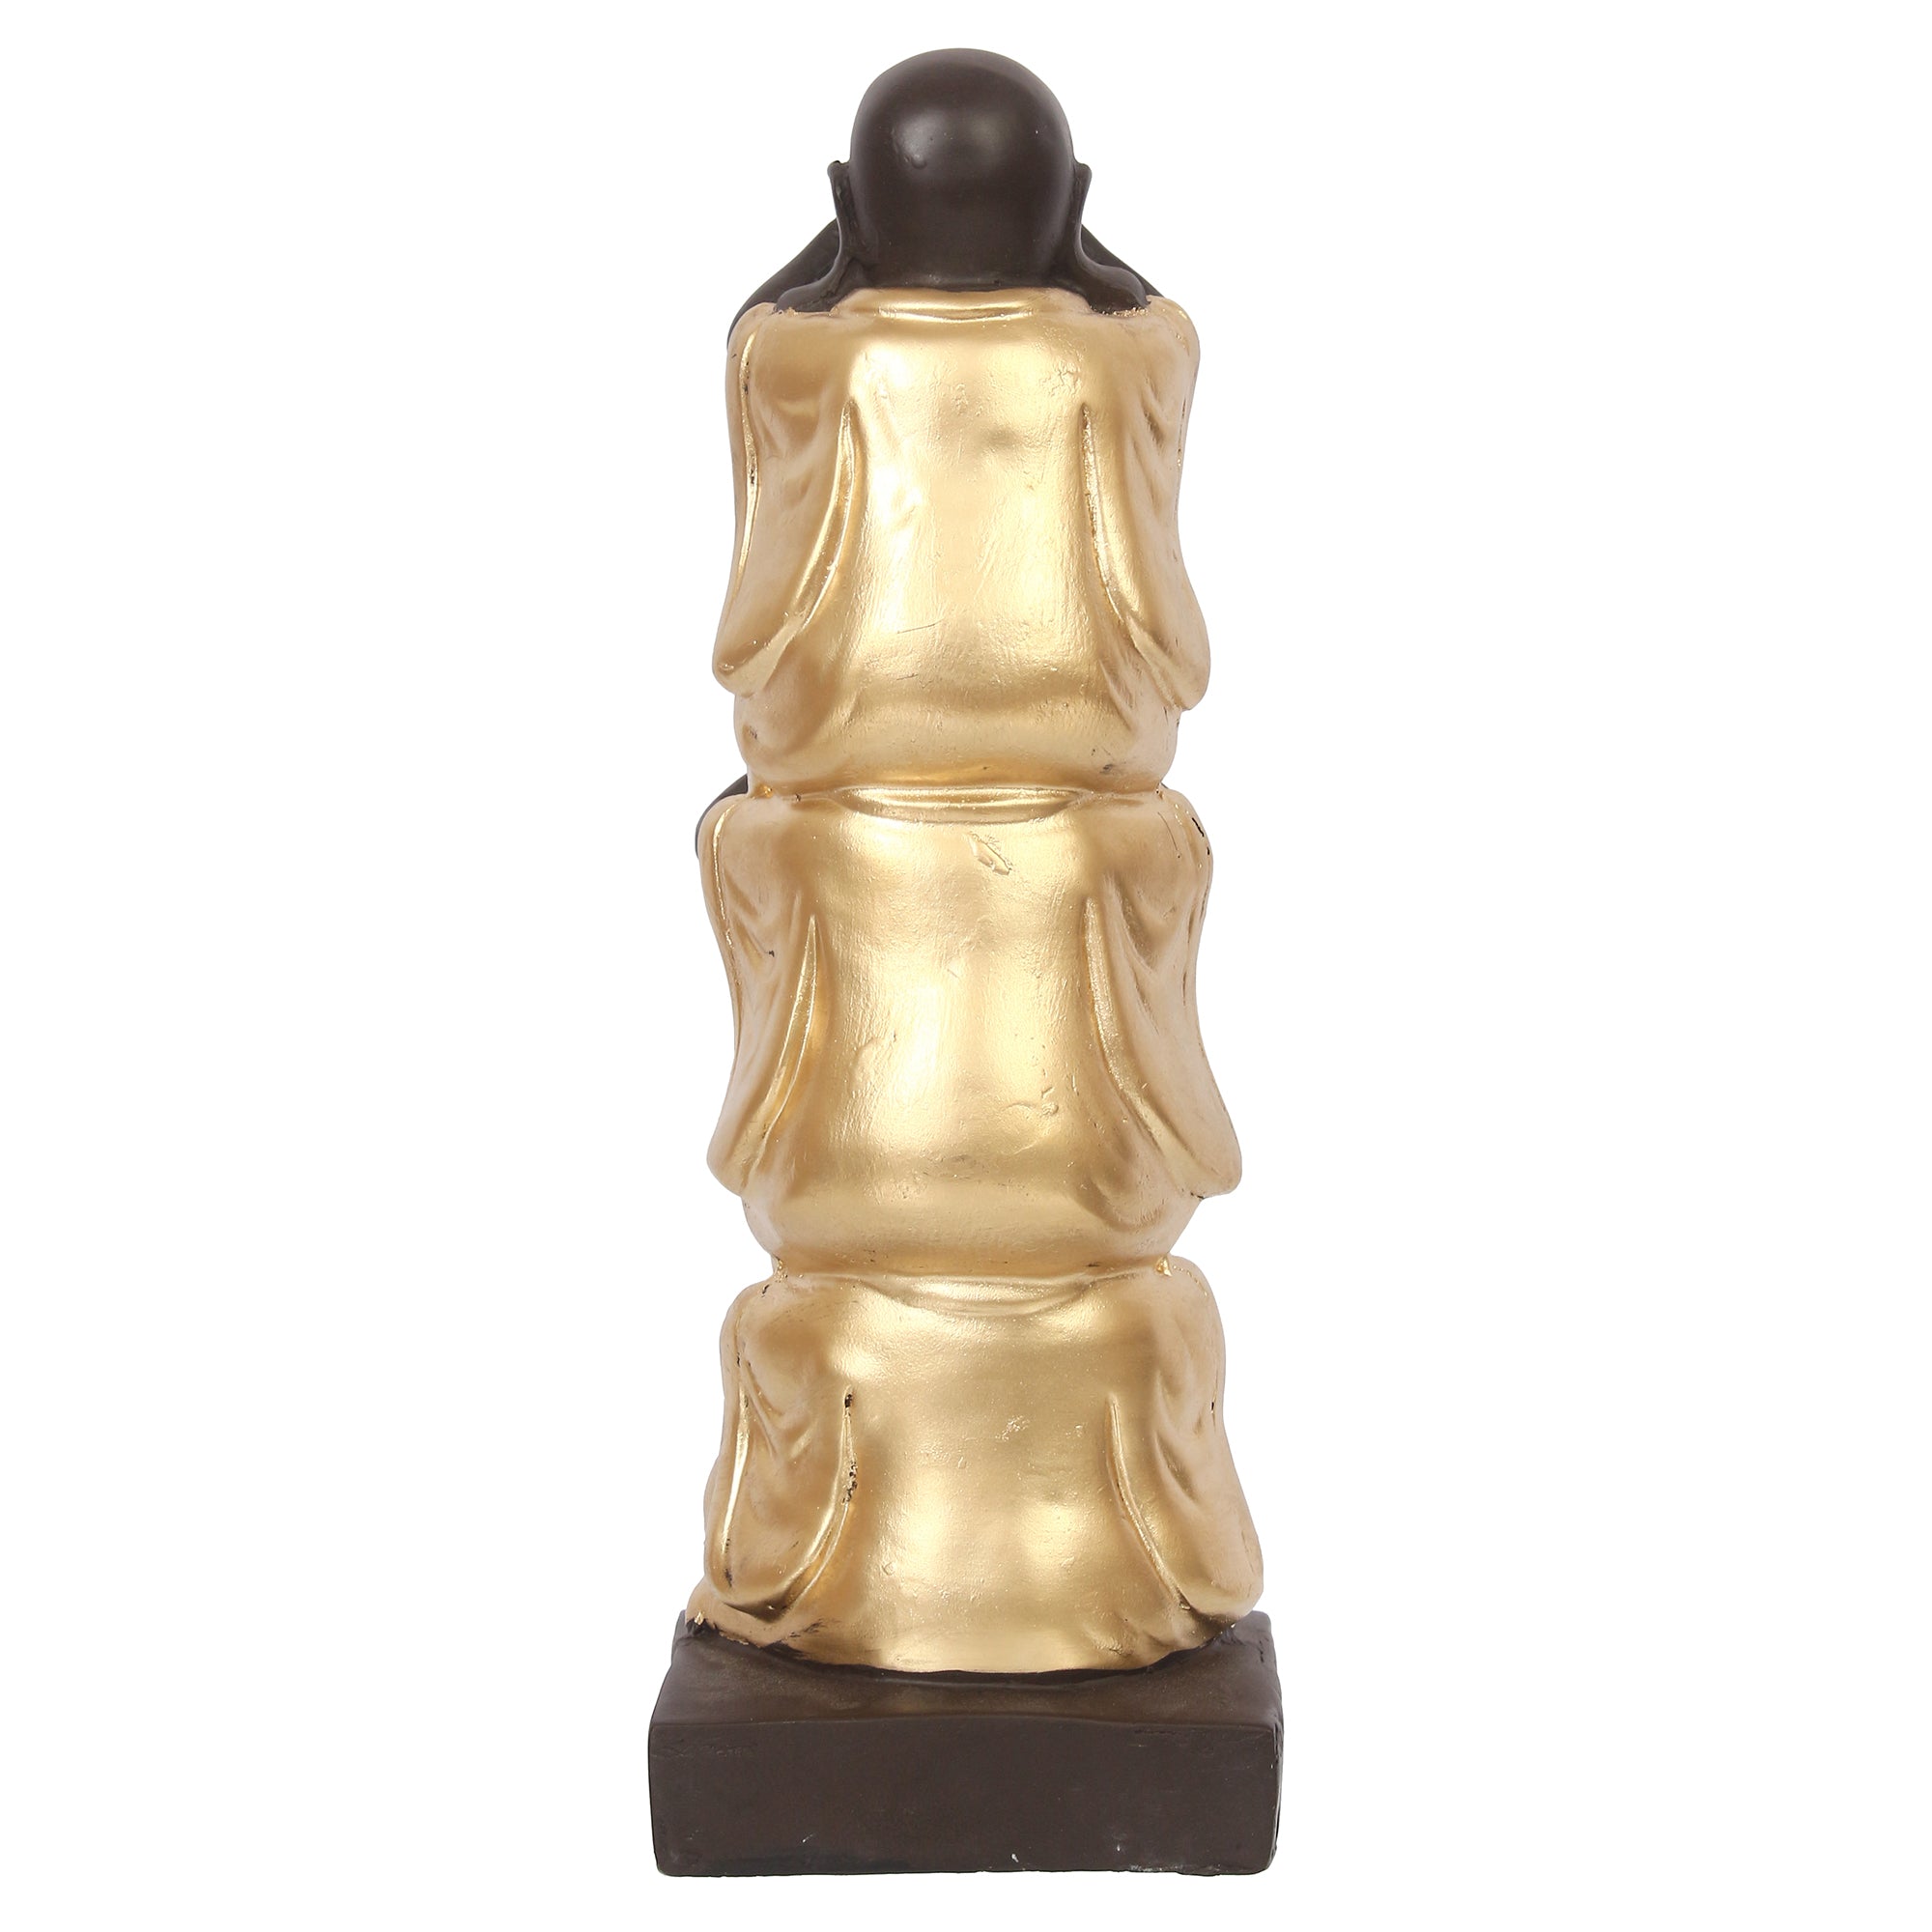 Polyresin Black and Golden Set of 3 Laughing Buddha Statue Standing on each other Decorative Showpiece 5